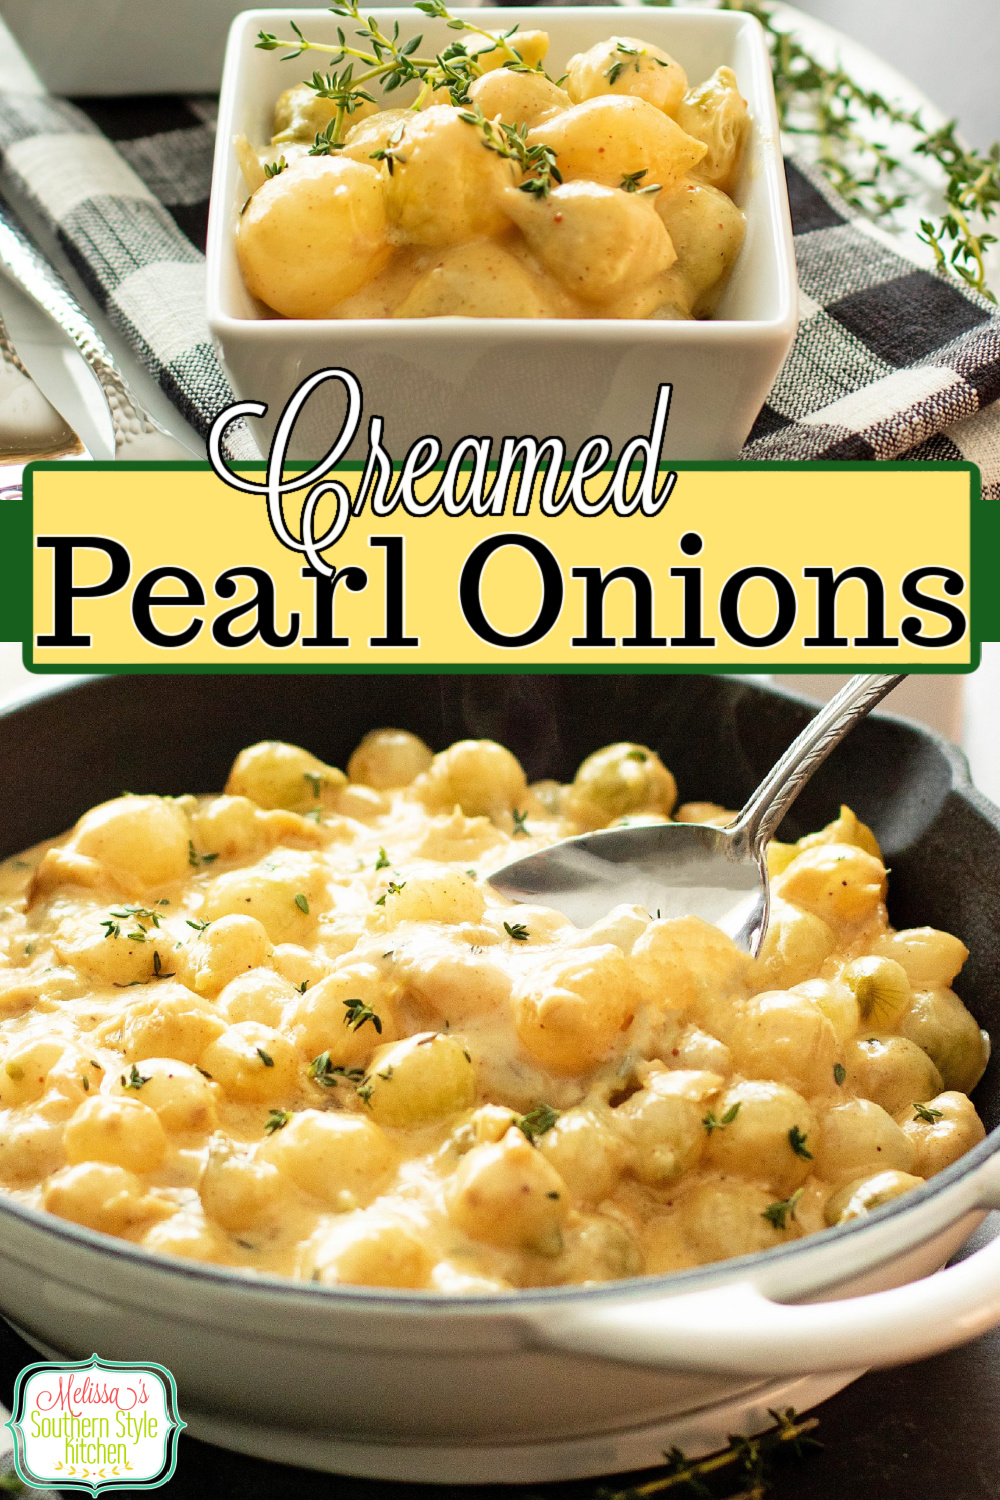 This Creamed Onions Recipe is an exceptional side dish for special occasions pairing beautifully with prime rib, pork, steak and chicken #creamedonions #onionrecipes #pearlonions #easycreamedonions #holidayrecipe #easyonionrecipes via @melissasssk